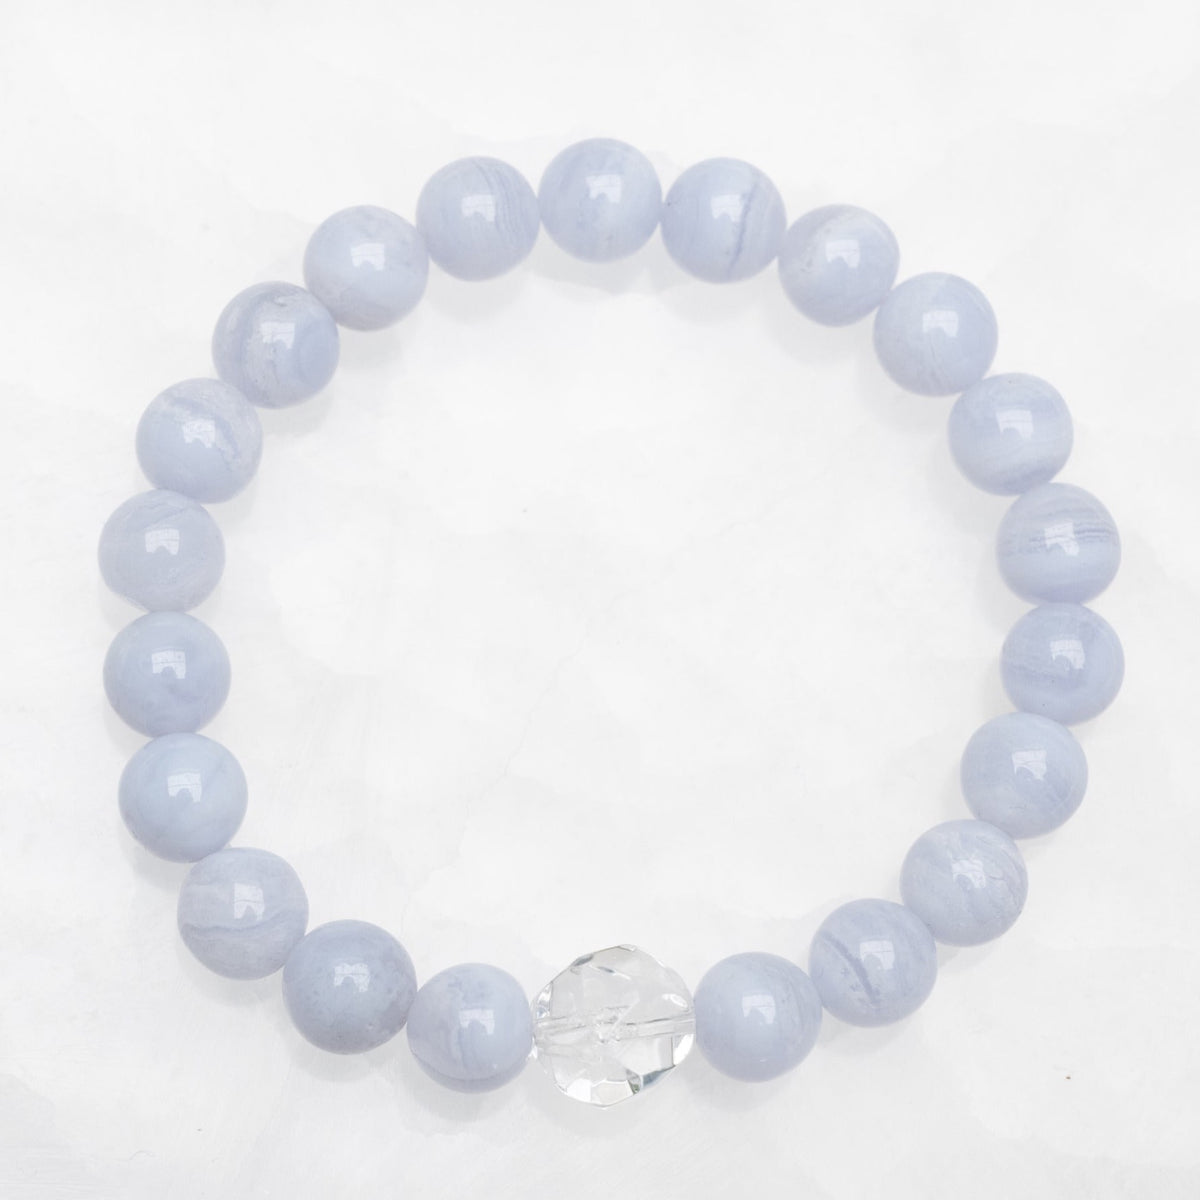 Amazon.com: Blue Lace Agate Crystal Bead Bracelet : CrystalAge: Toys & Games